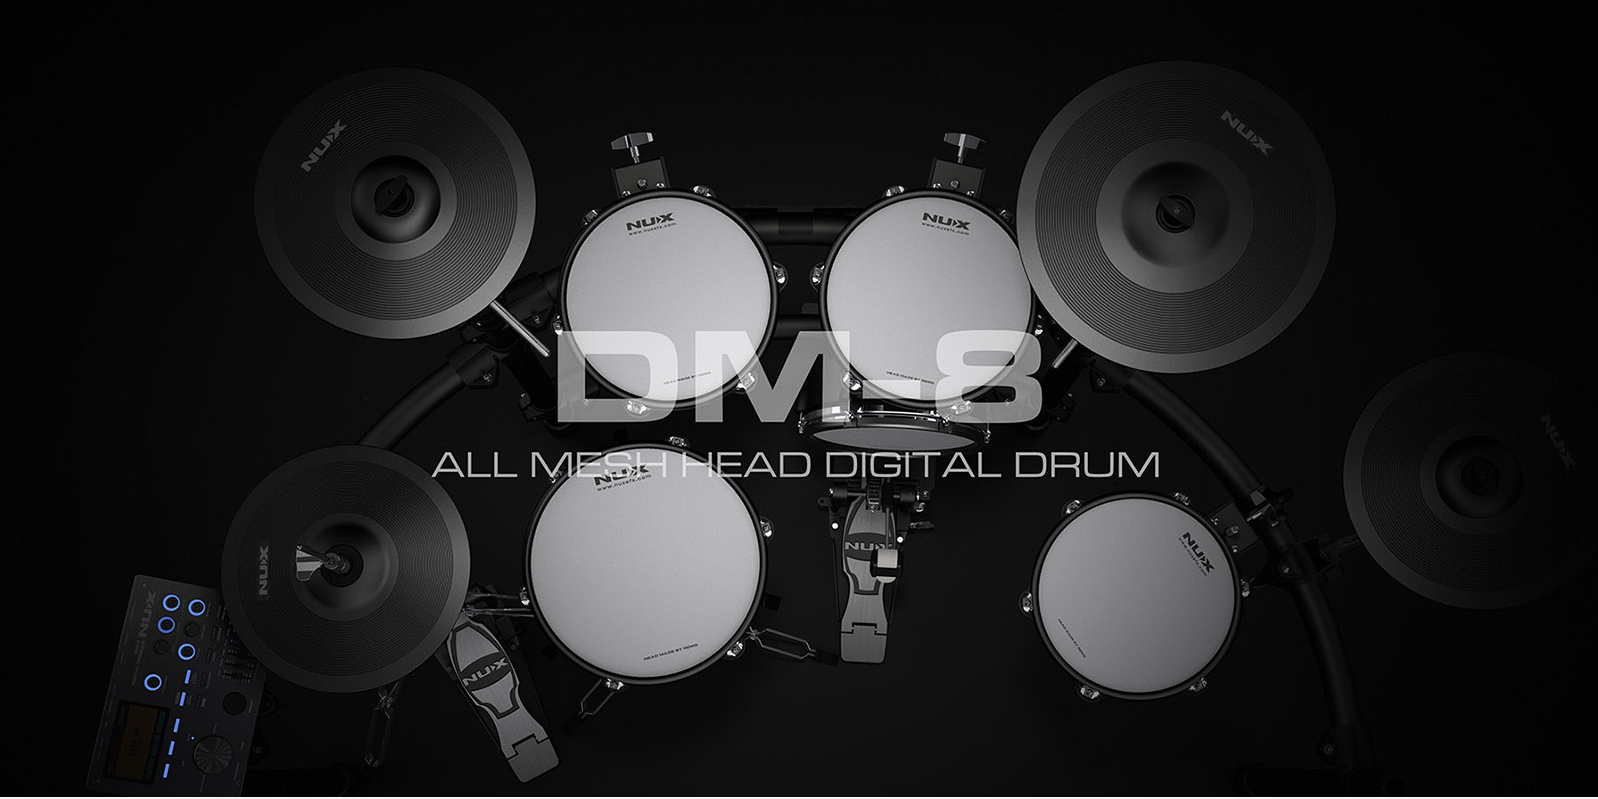 Newest! Nux DM8 all REMO Mesh head digital drum 9-Pieces Electronic Drum 3